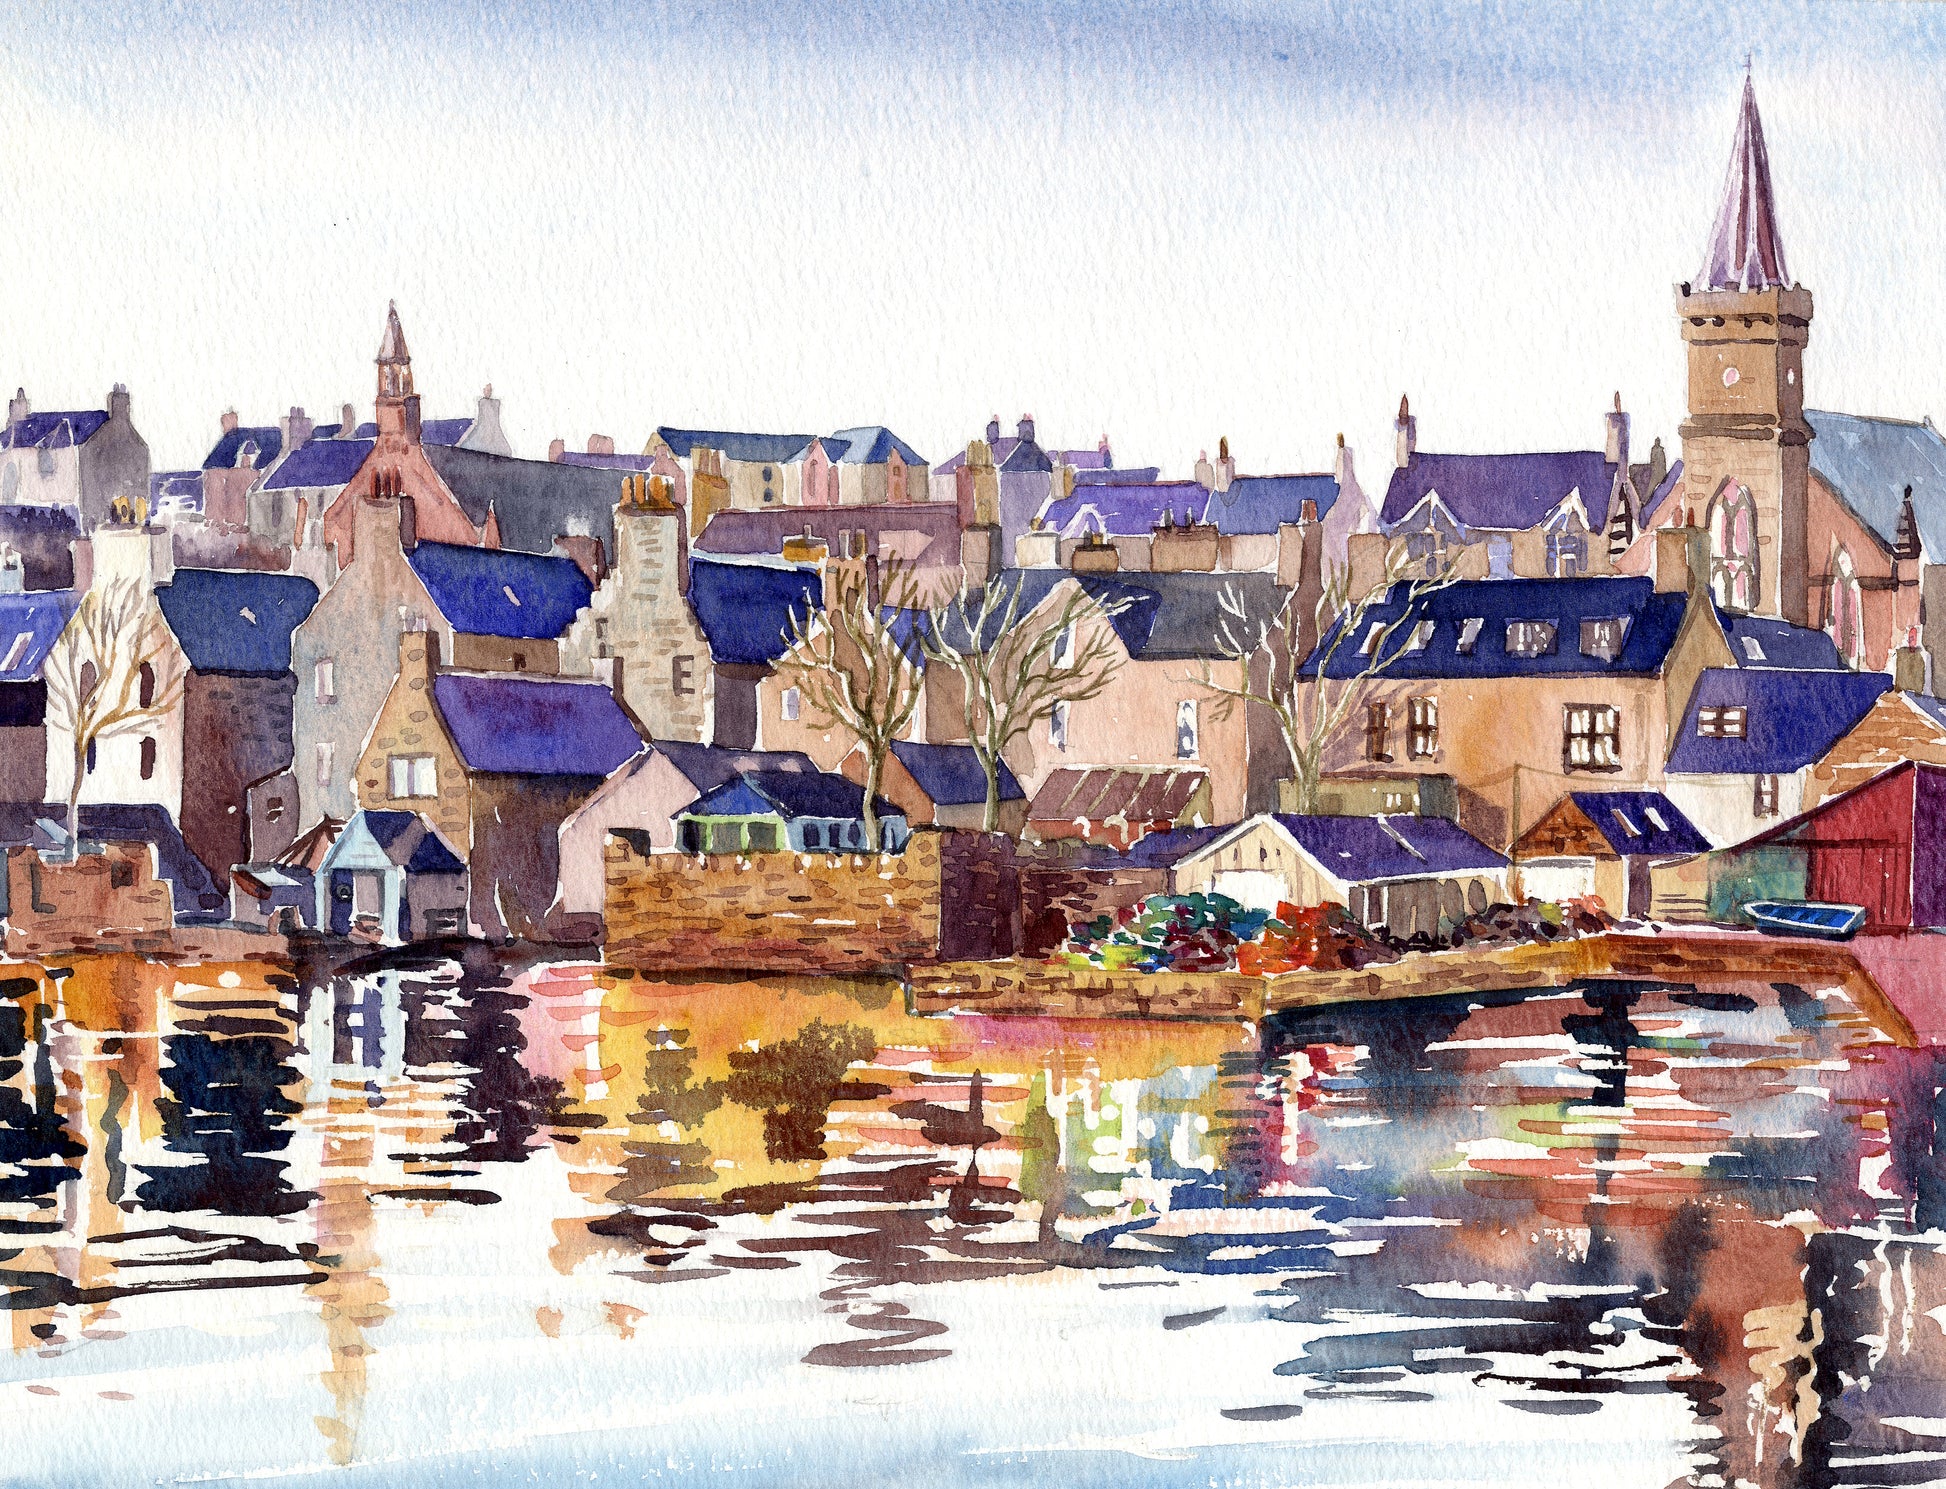 A print from a watercolour painting of the town, Stromness by Orkney artist Jane Glue, Scotland